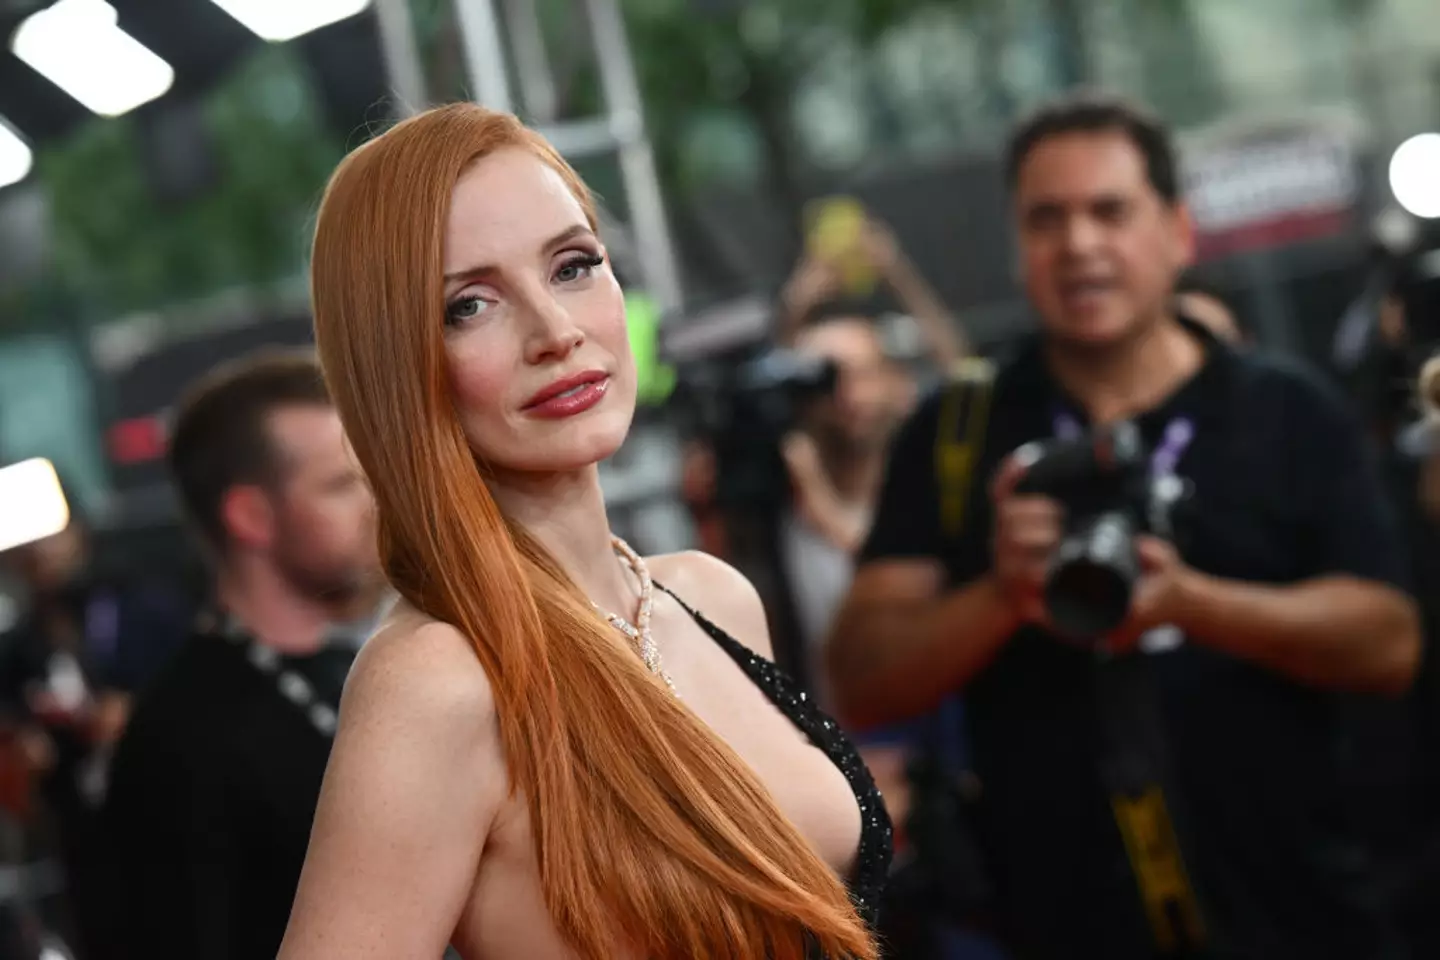 Chastain took to Twitter to repost a tweet about Jonas' 'manipulation'.